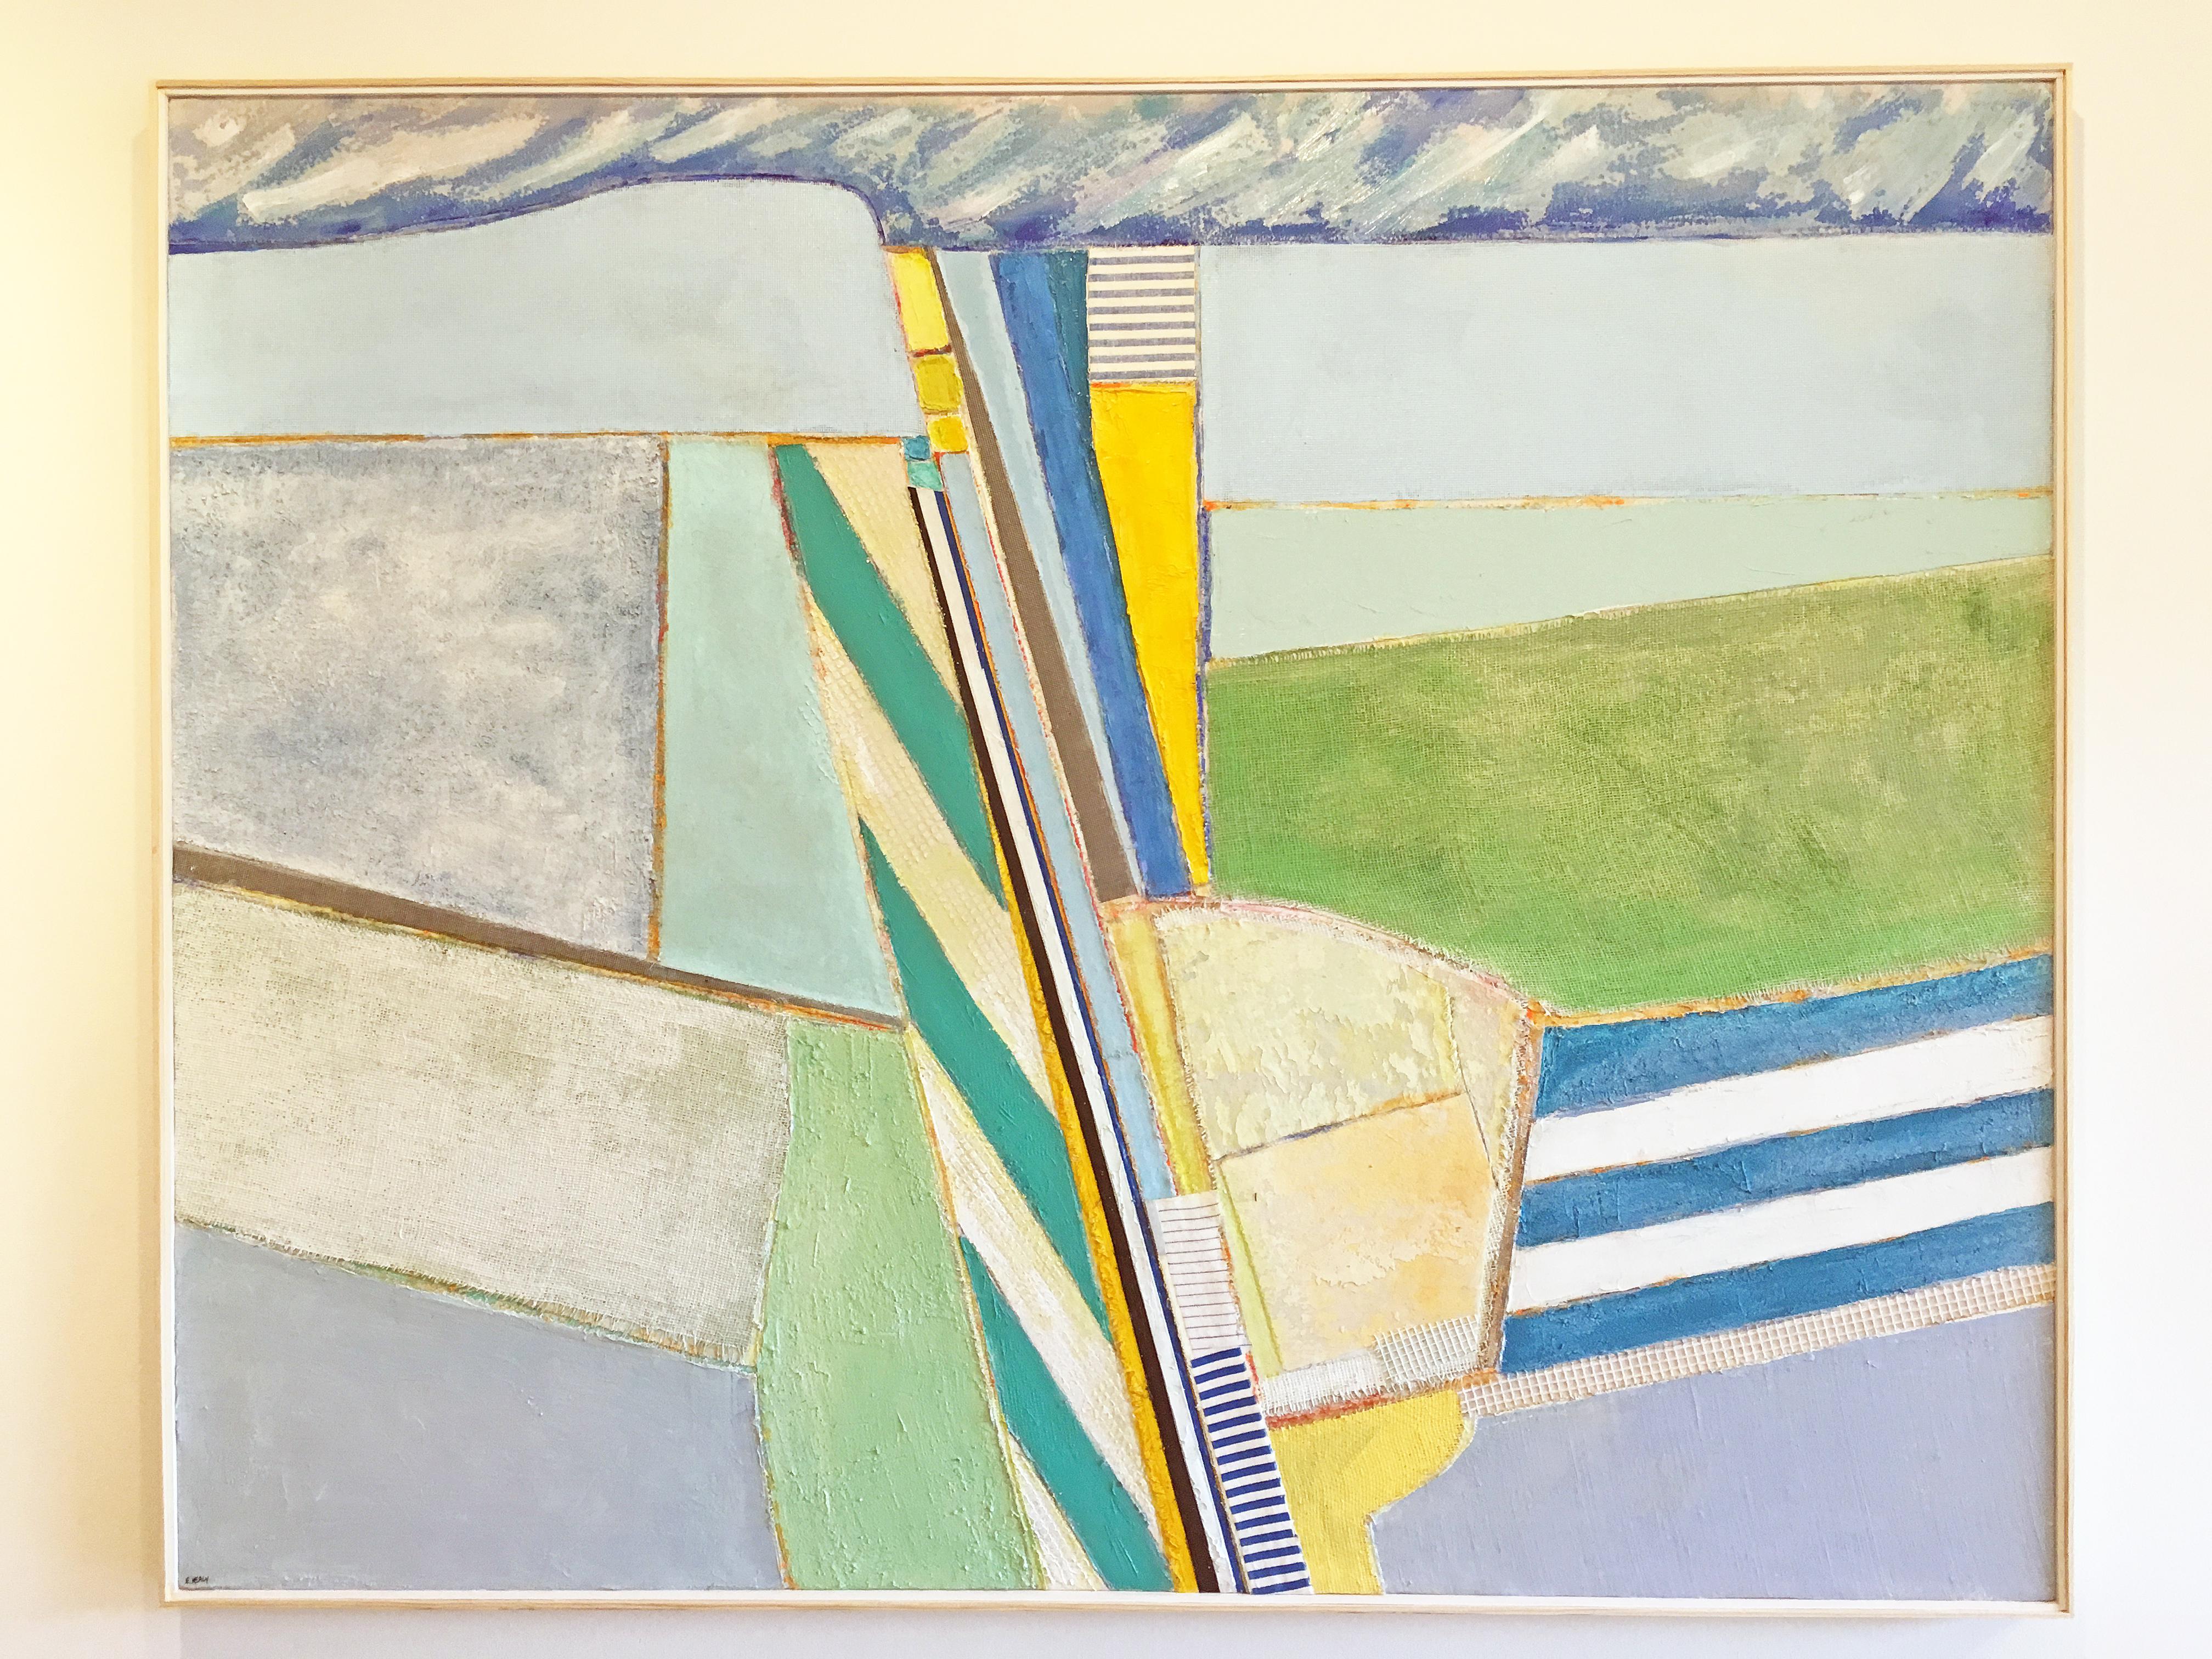 'Stonington' by Eugene Healy, 2019. Oil and fabric collage on canvas, 48 x 60 in. This landscape painting features an abstracted coastal scene with land and sea in aerial view. In calming colors of dark blue, light blue, green, yellow, beige, white,